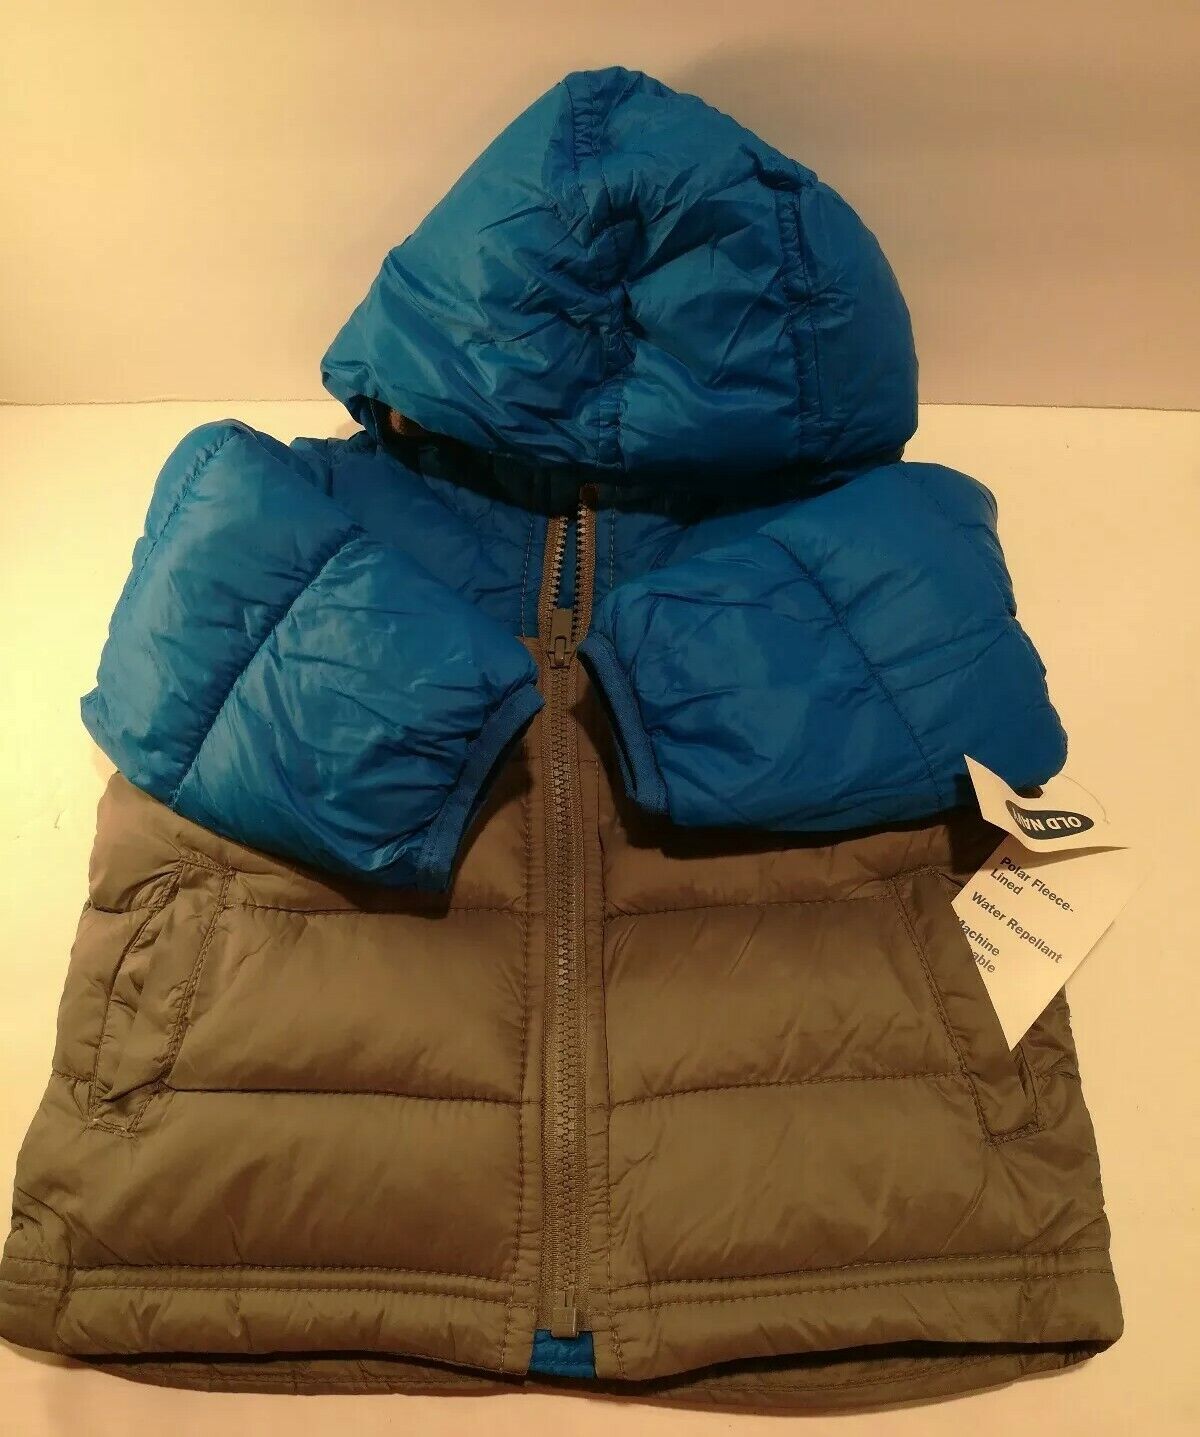 Old Navy Toddler Boys Girls Winter Puffer Jacket w Hood 12-18 months Blue Gray  Old Navy